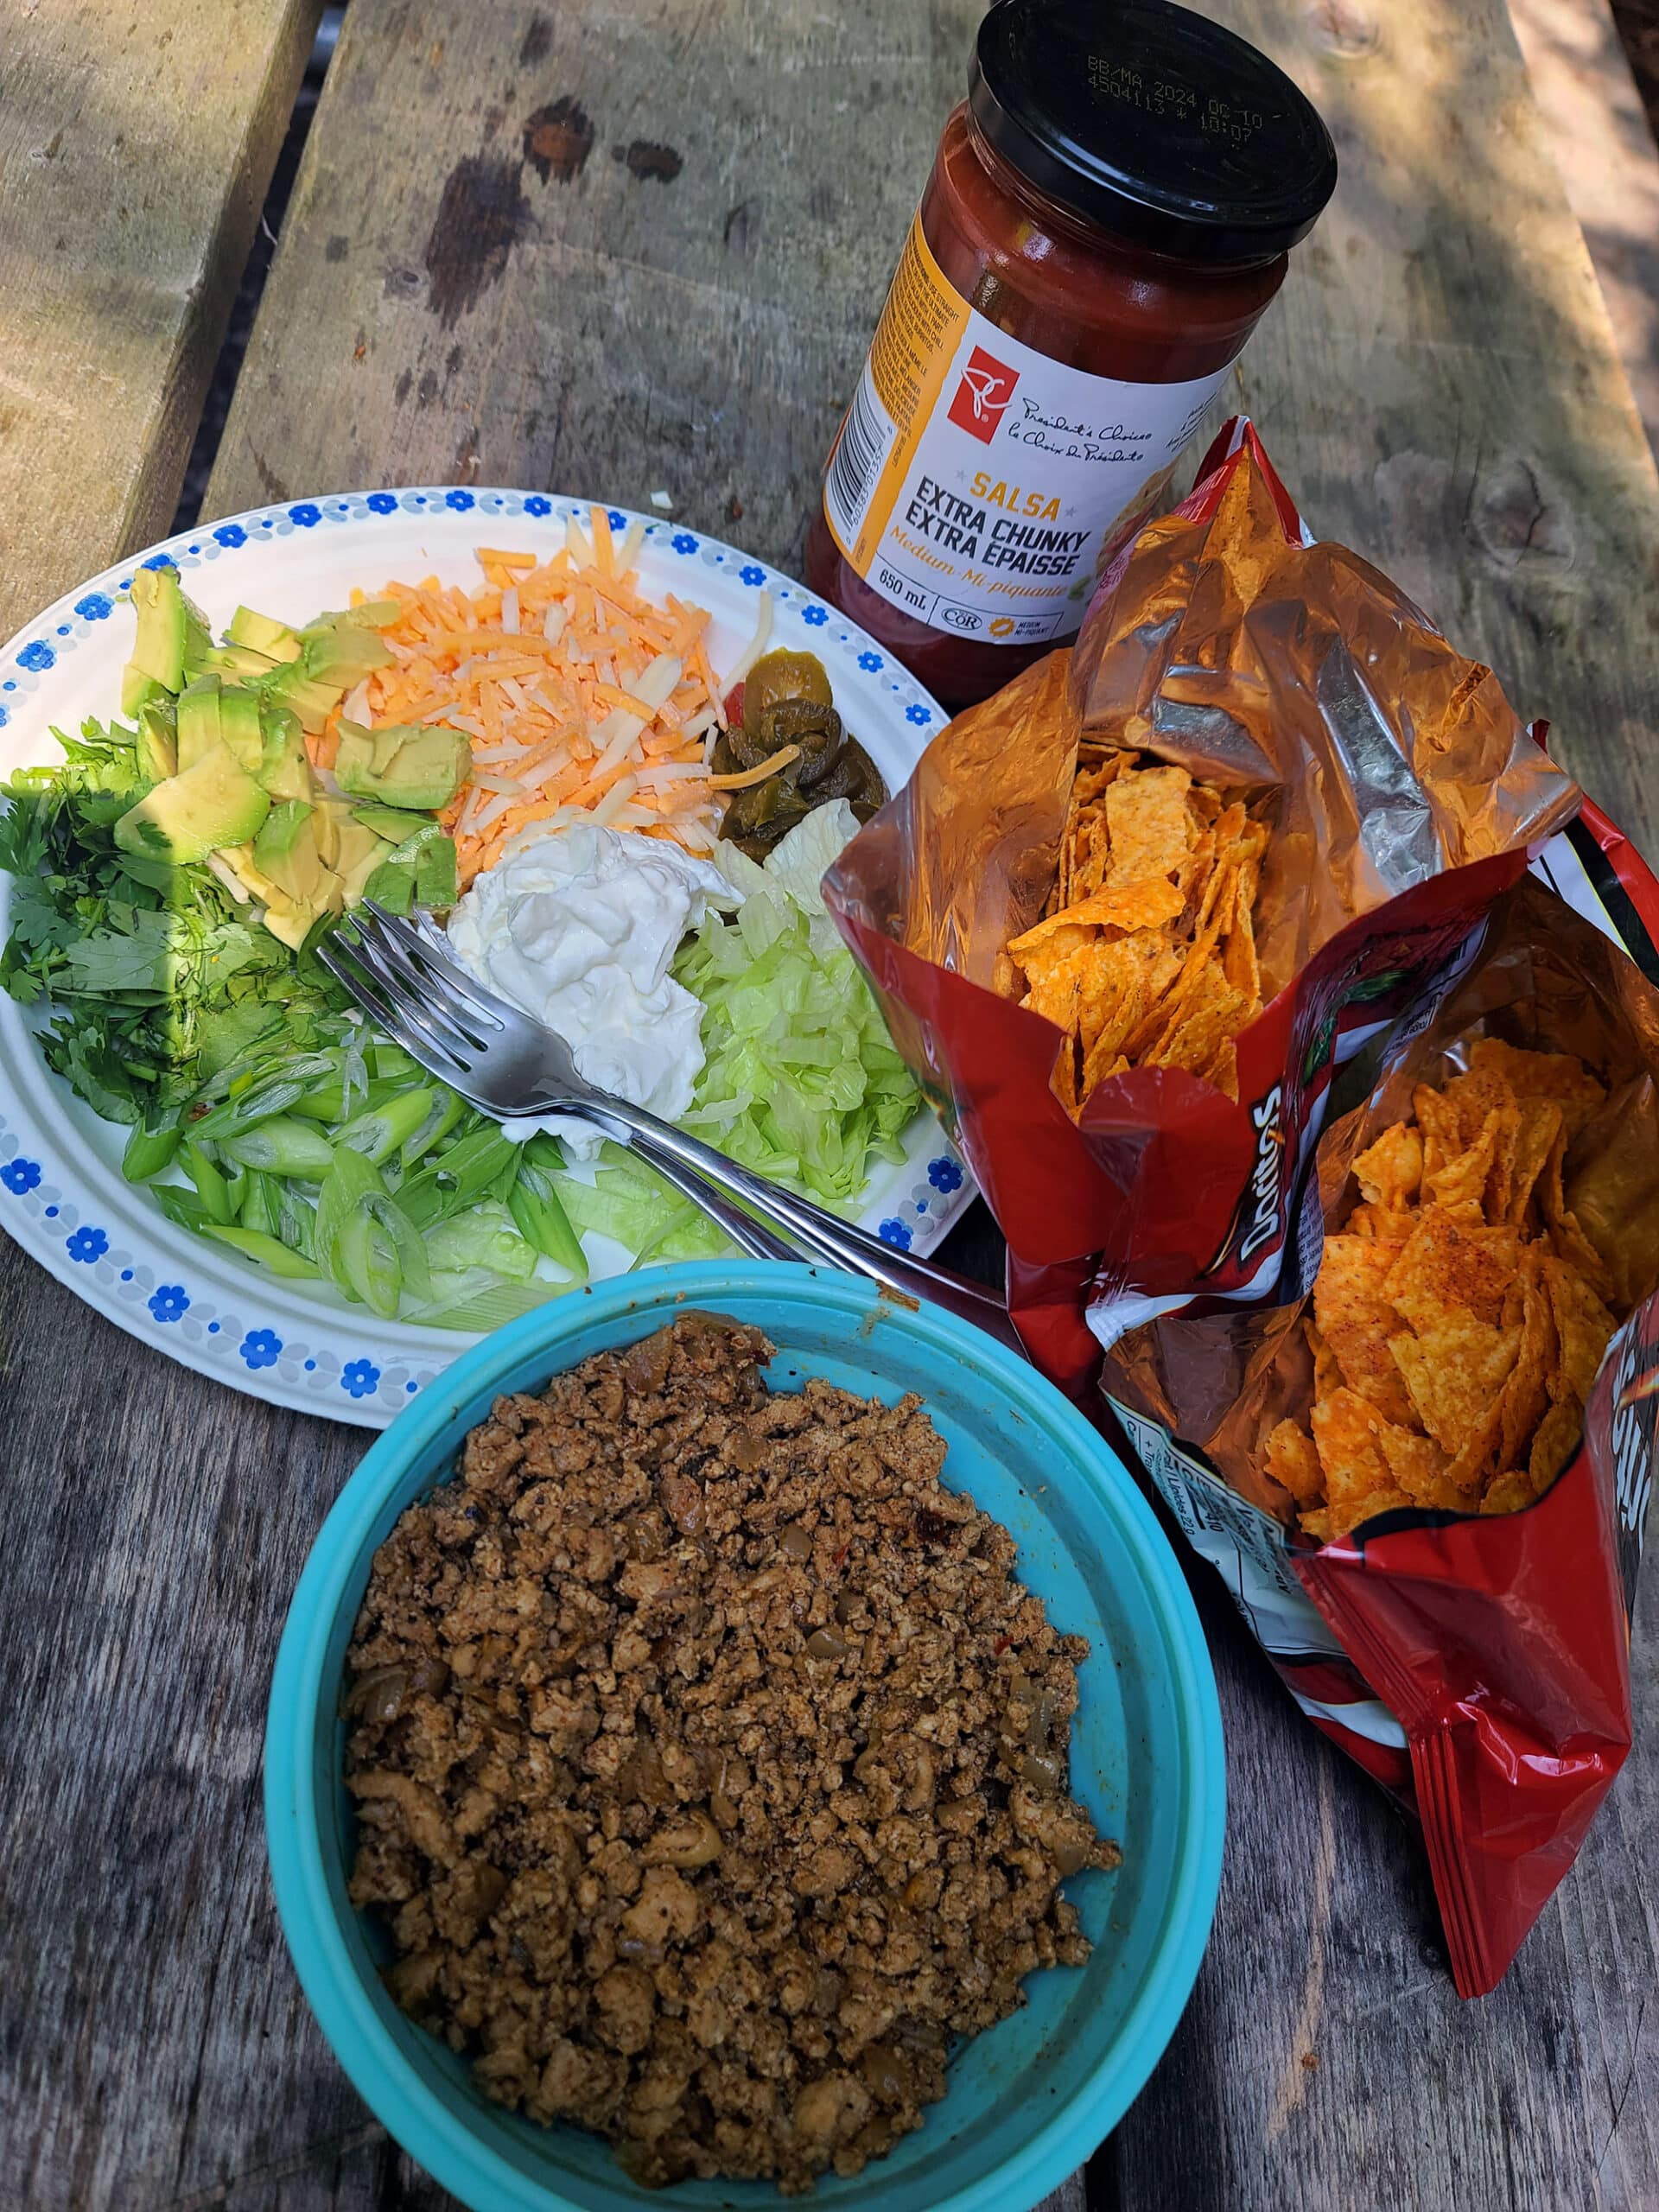 2 open bags of doritos next to all of the walking tacos ingredients.